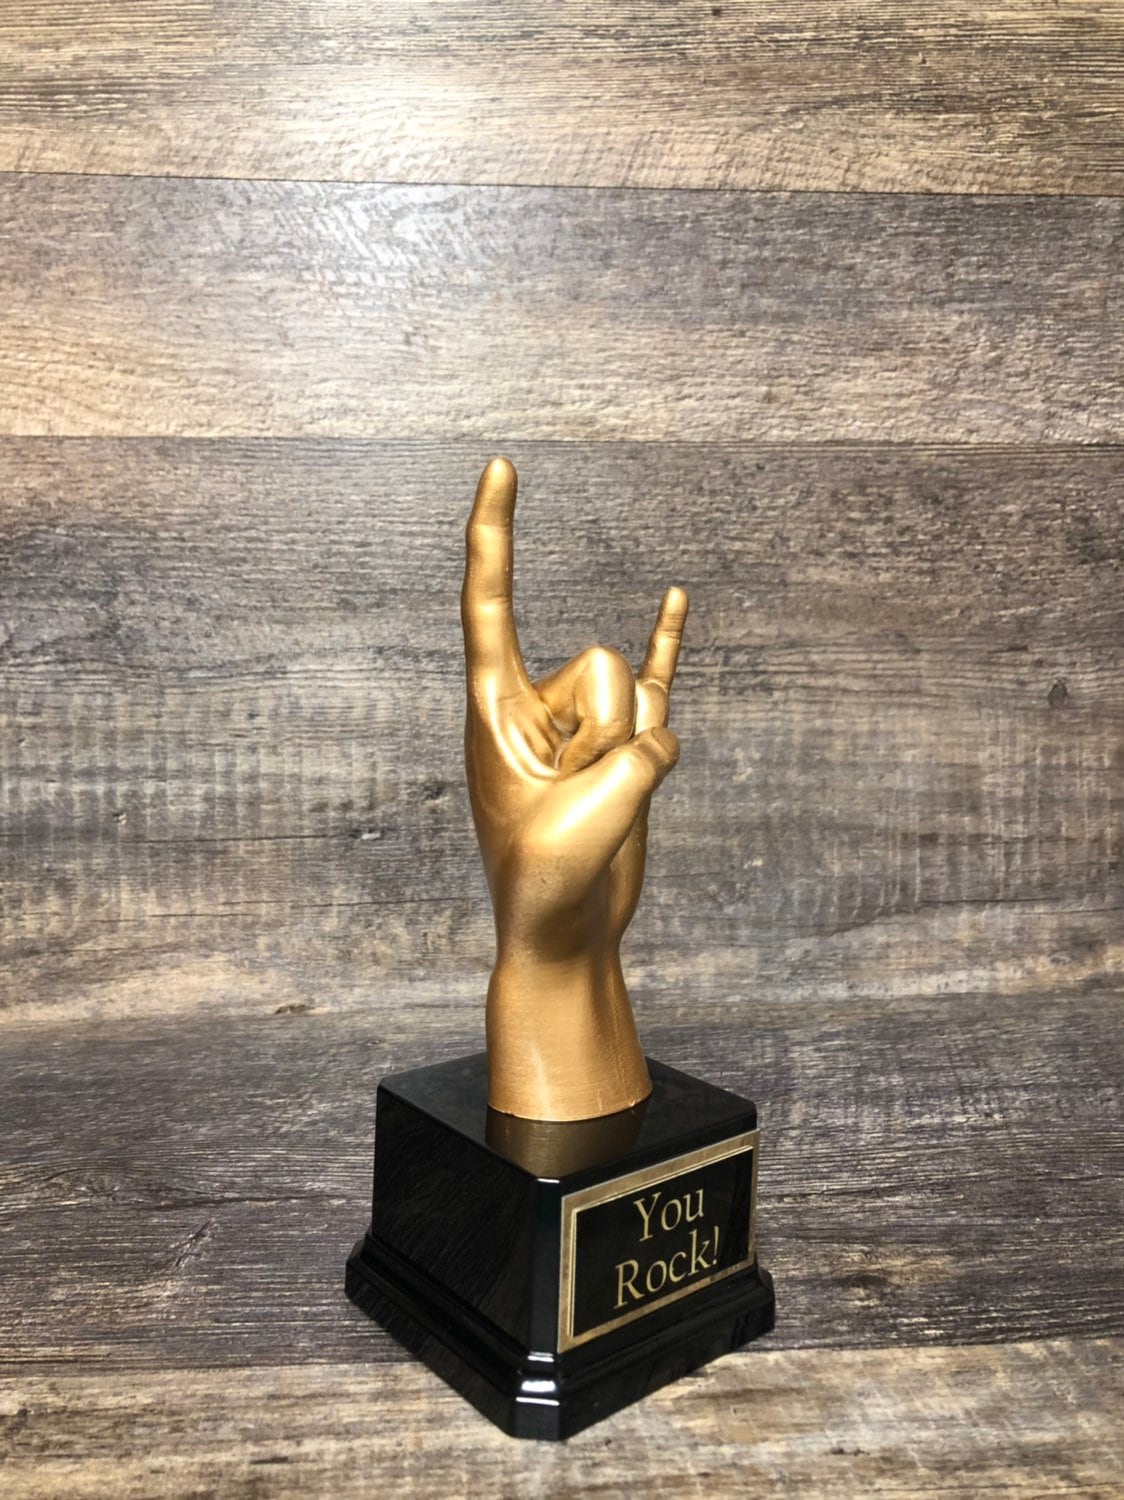 YOU ROCK! Funny Trophy Achievement Award Top Sales Corporate Award Best Sales Highest Sales Stats Thank You Gift Trophy Appreciation Award